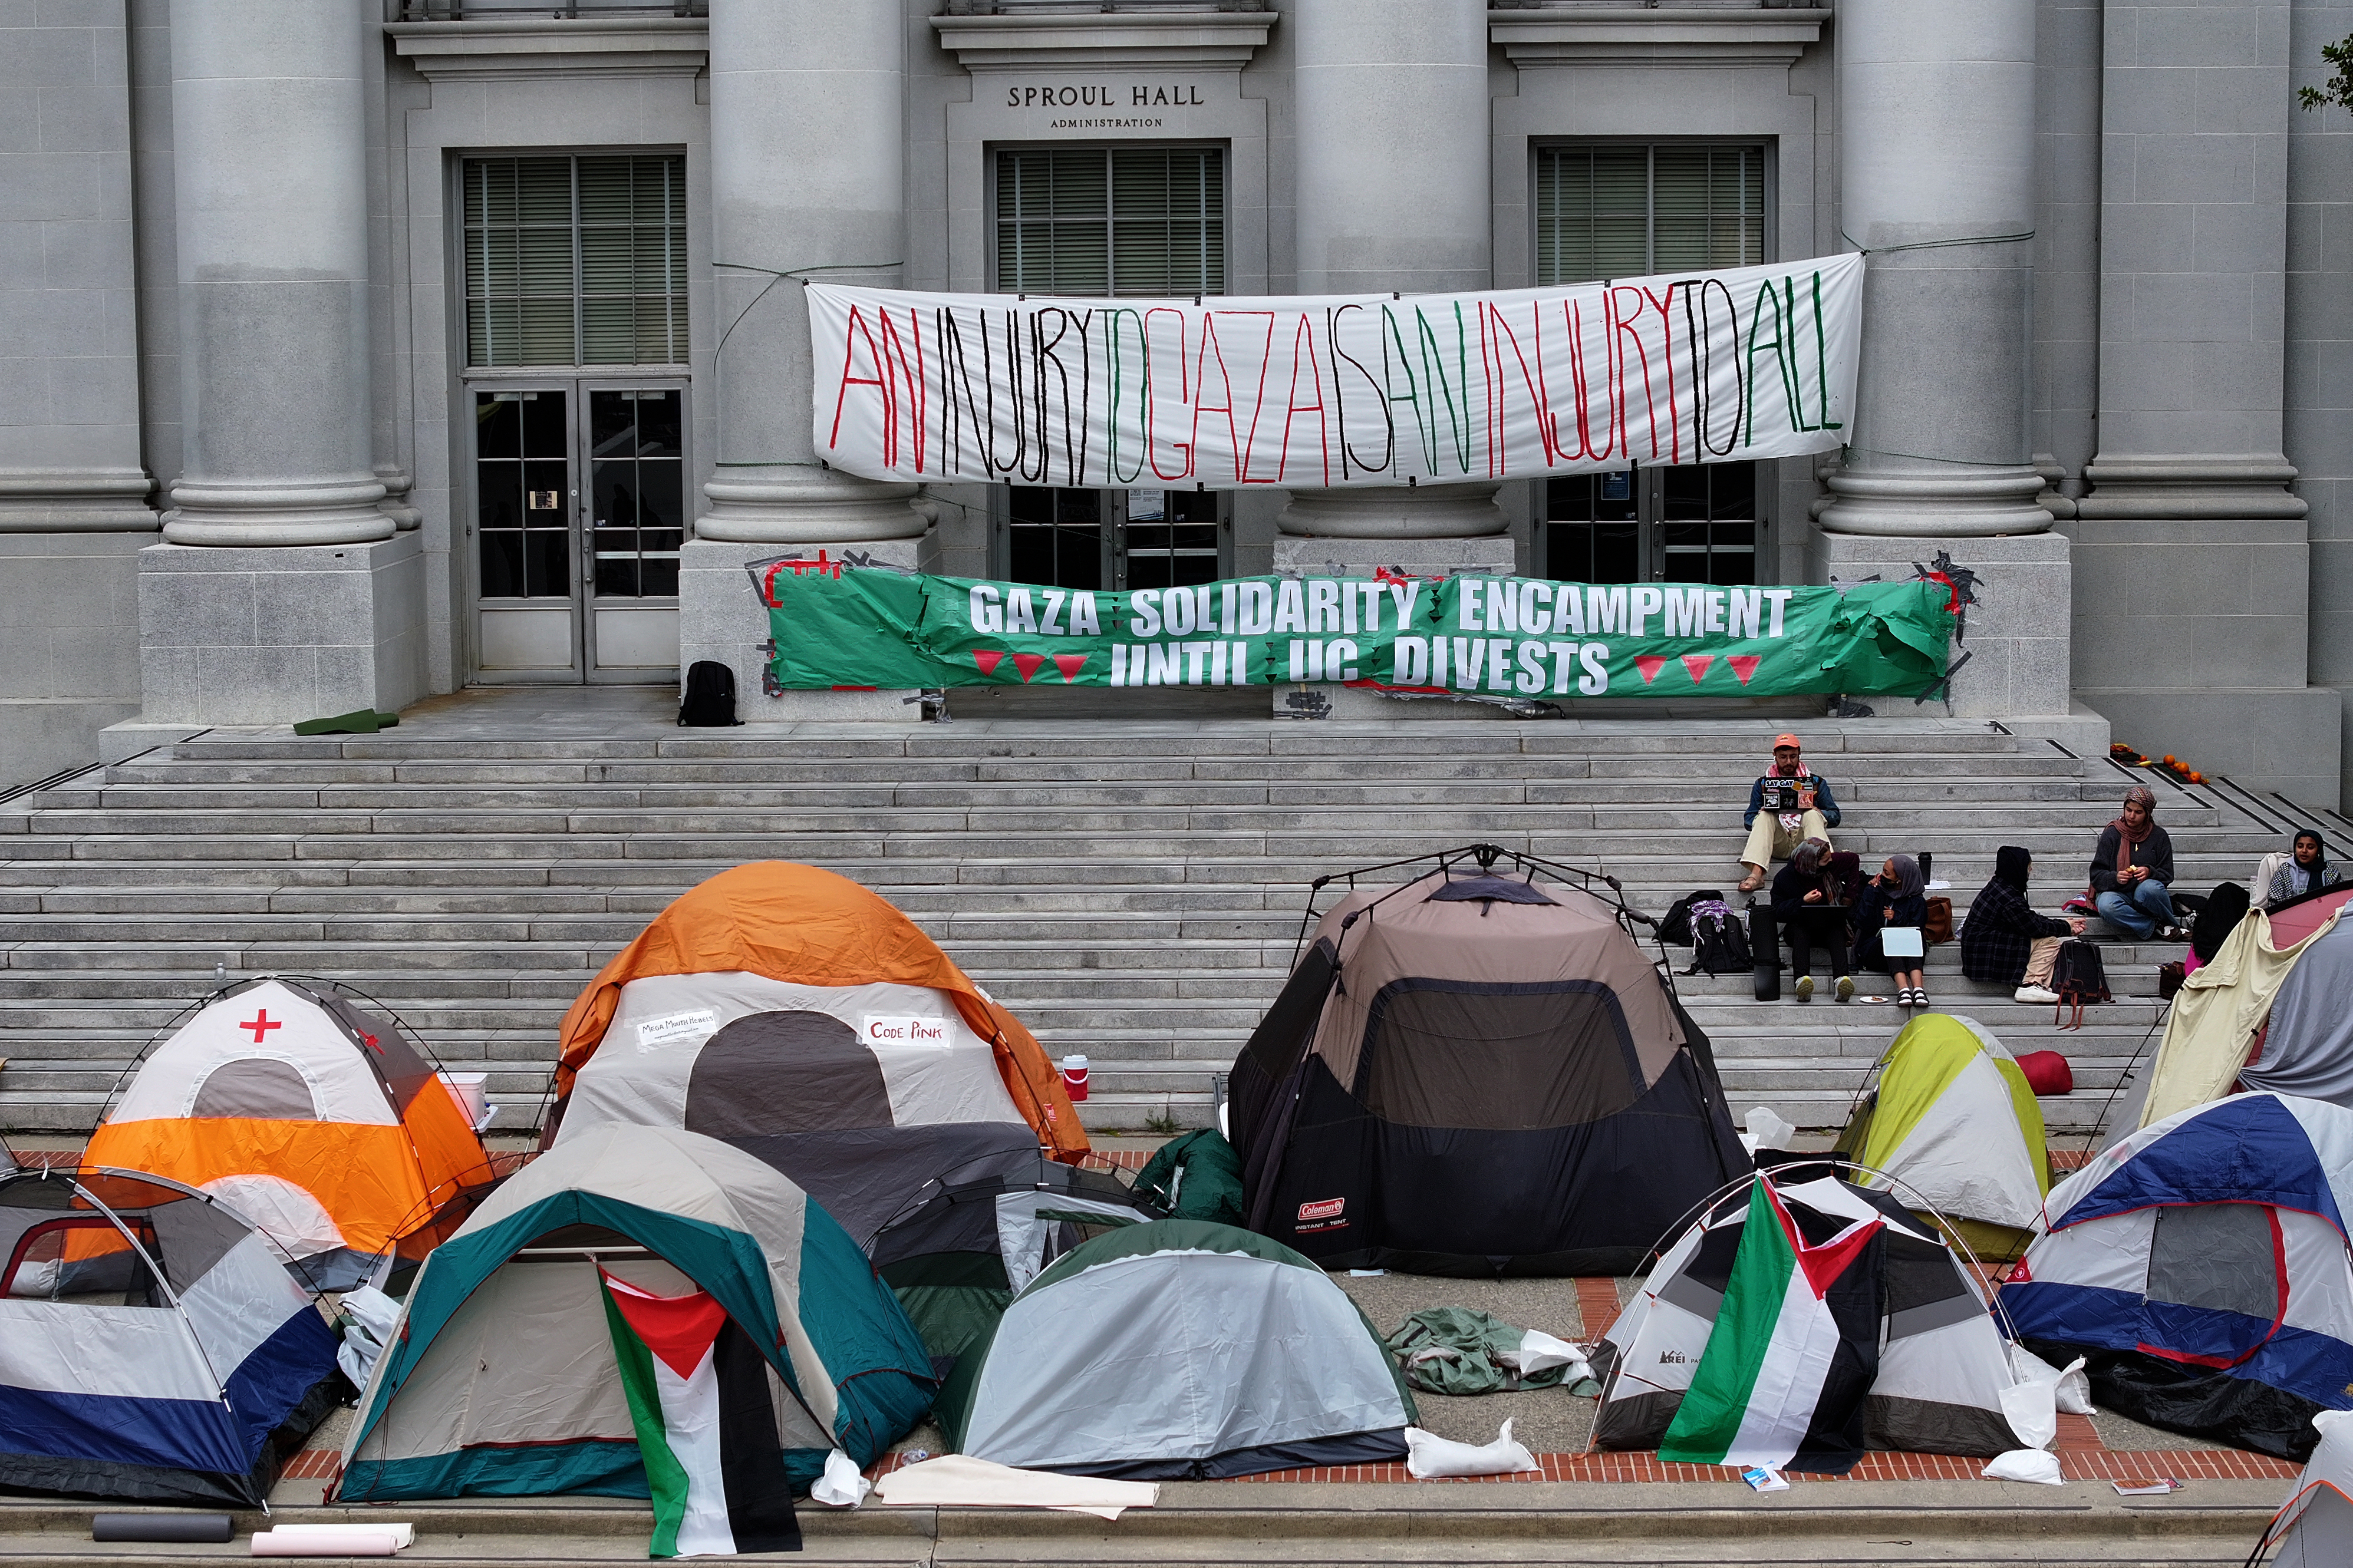 Tents are set up on steps of a building with banners about solidarity and divestment. People are seated around casually